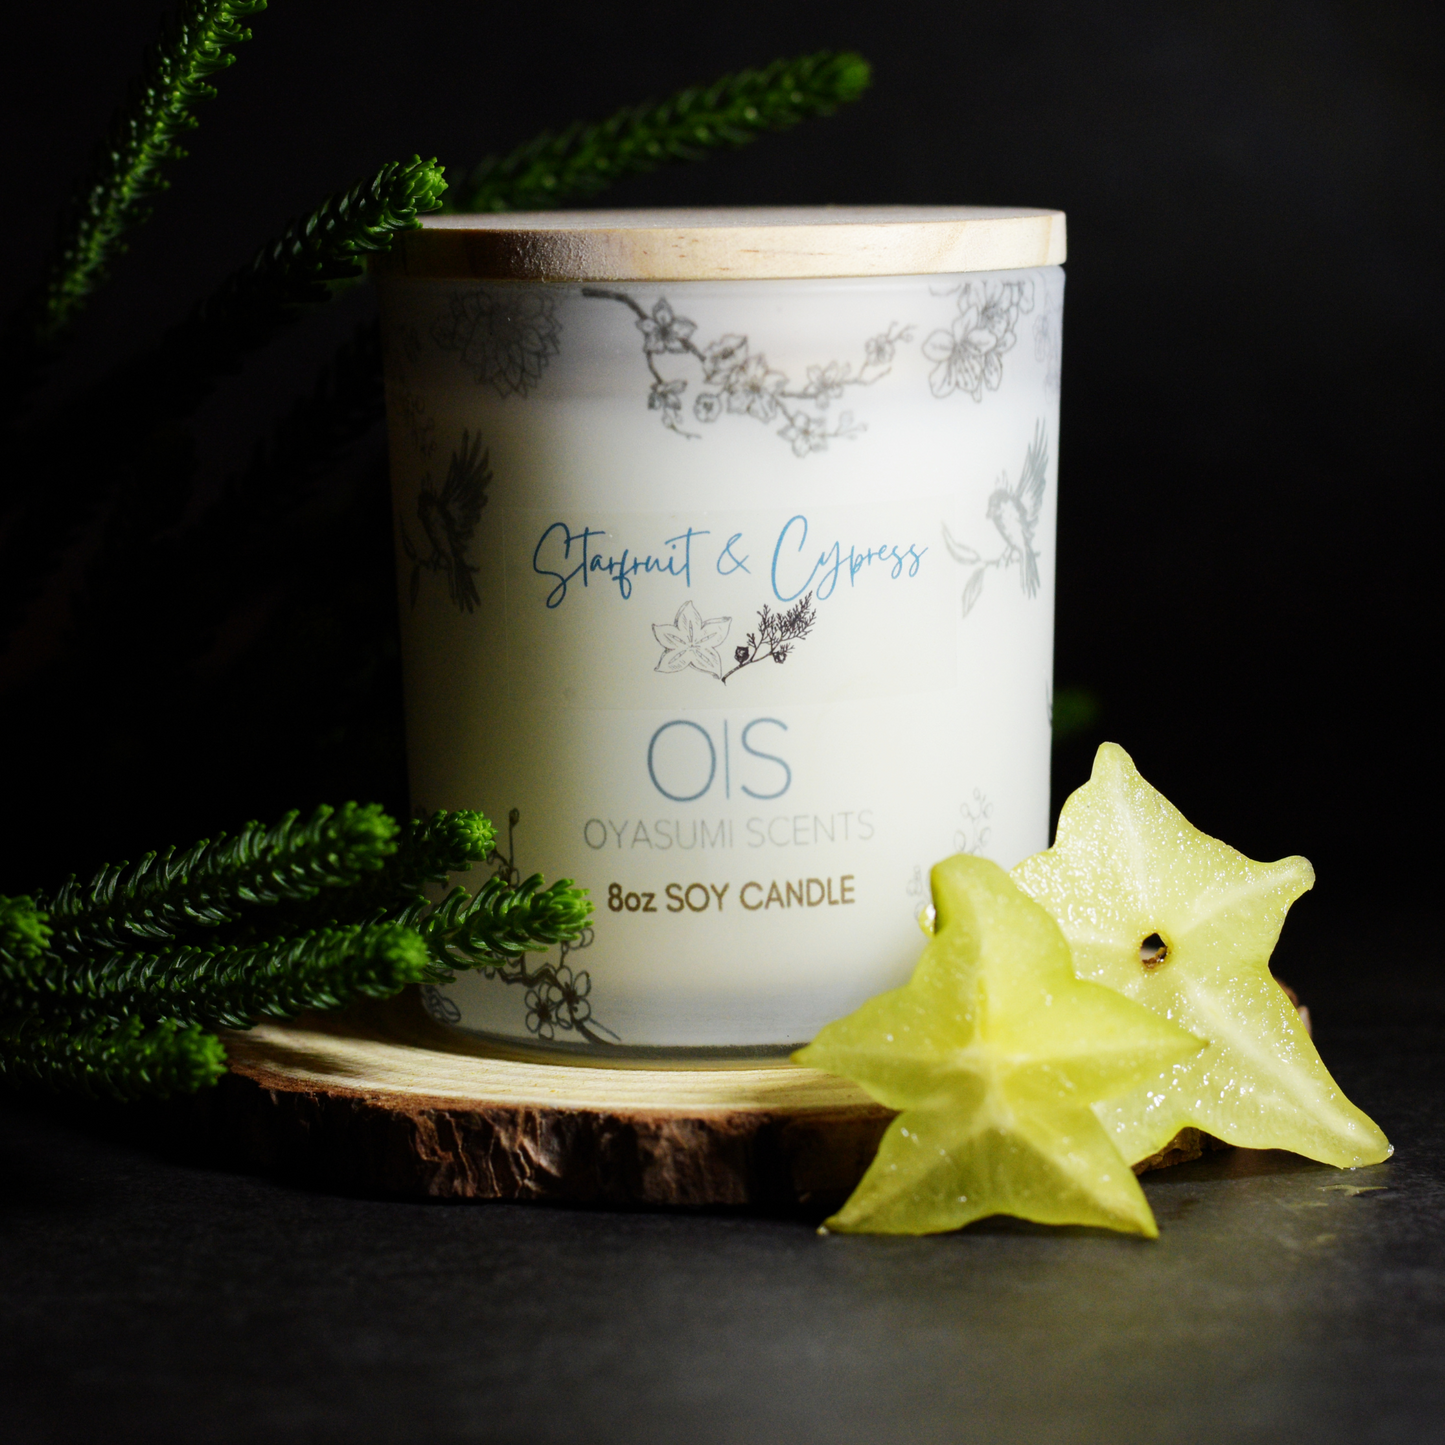 Starfruit & Cypress Soy Candle